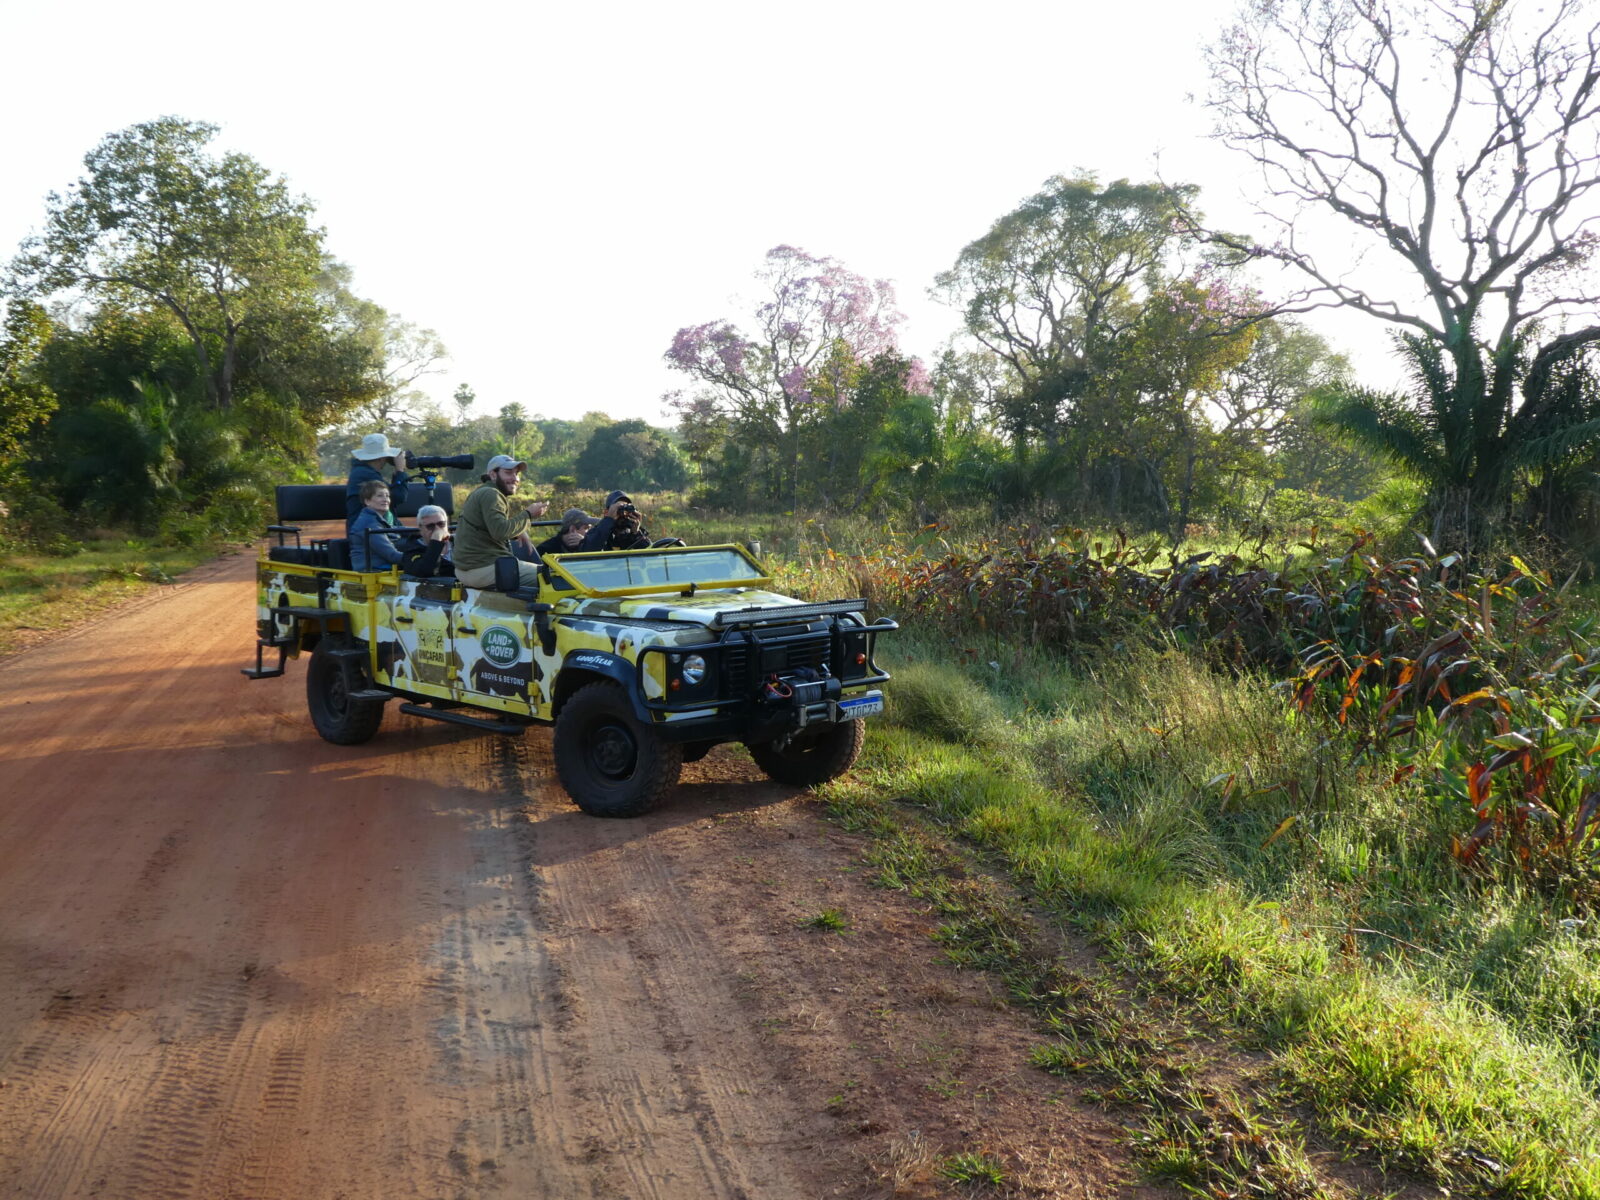 A game drive in the Pantanal in Brazil